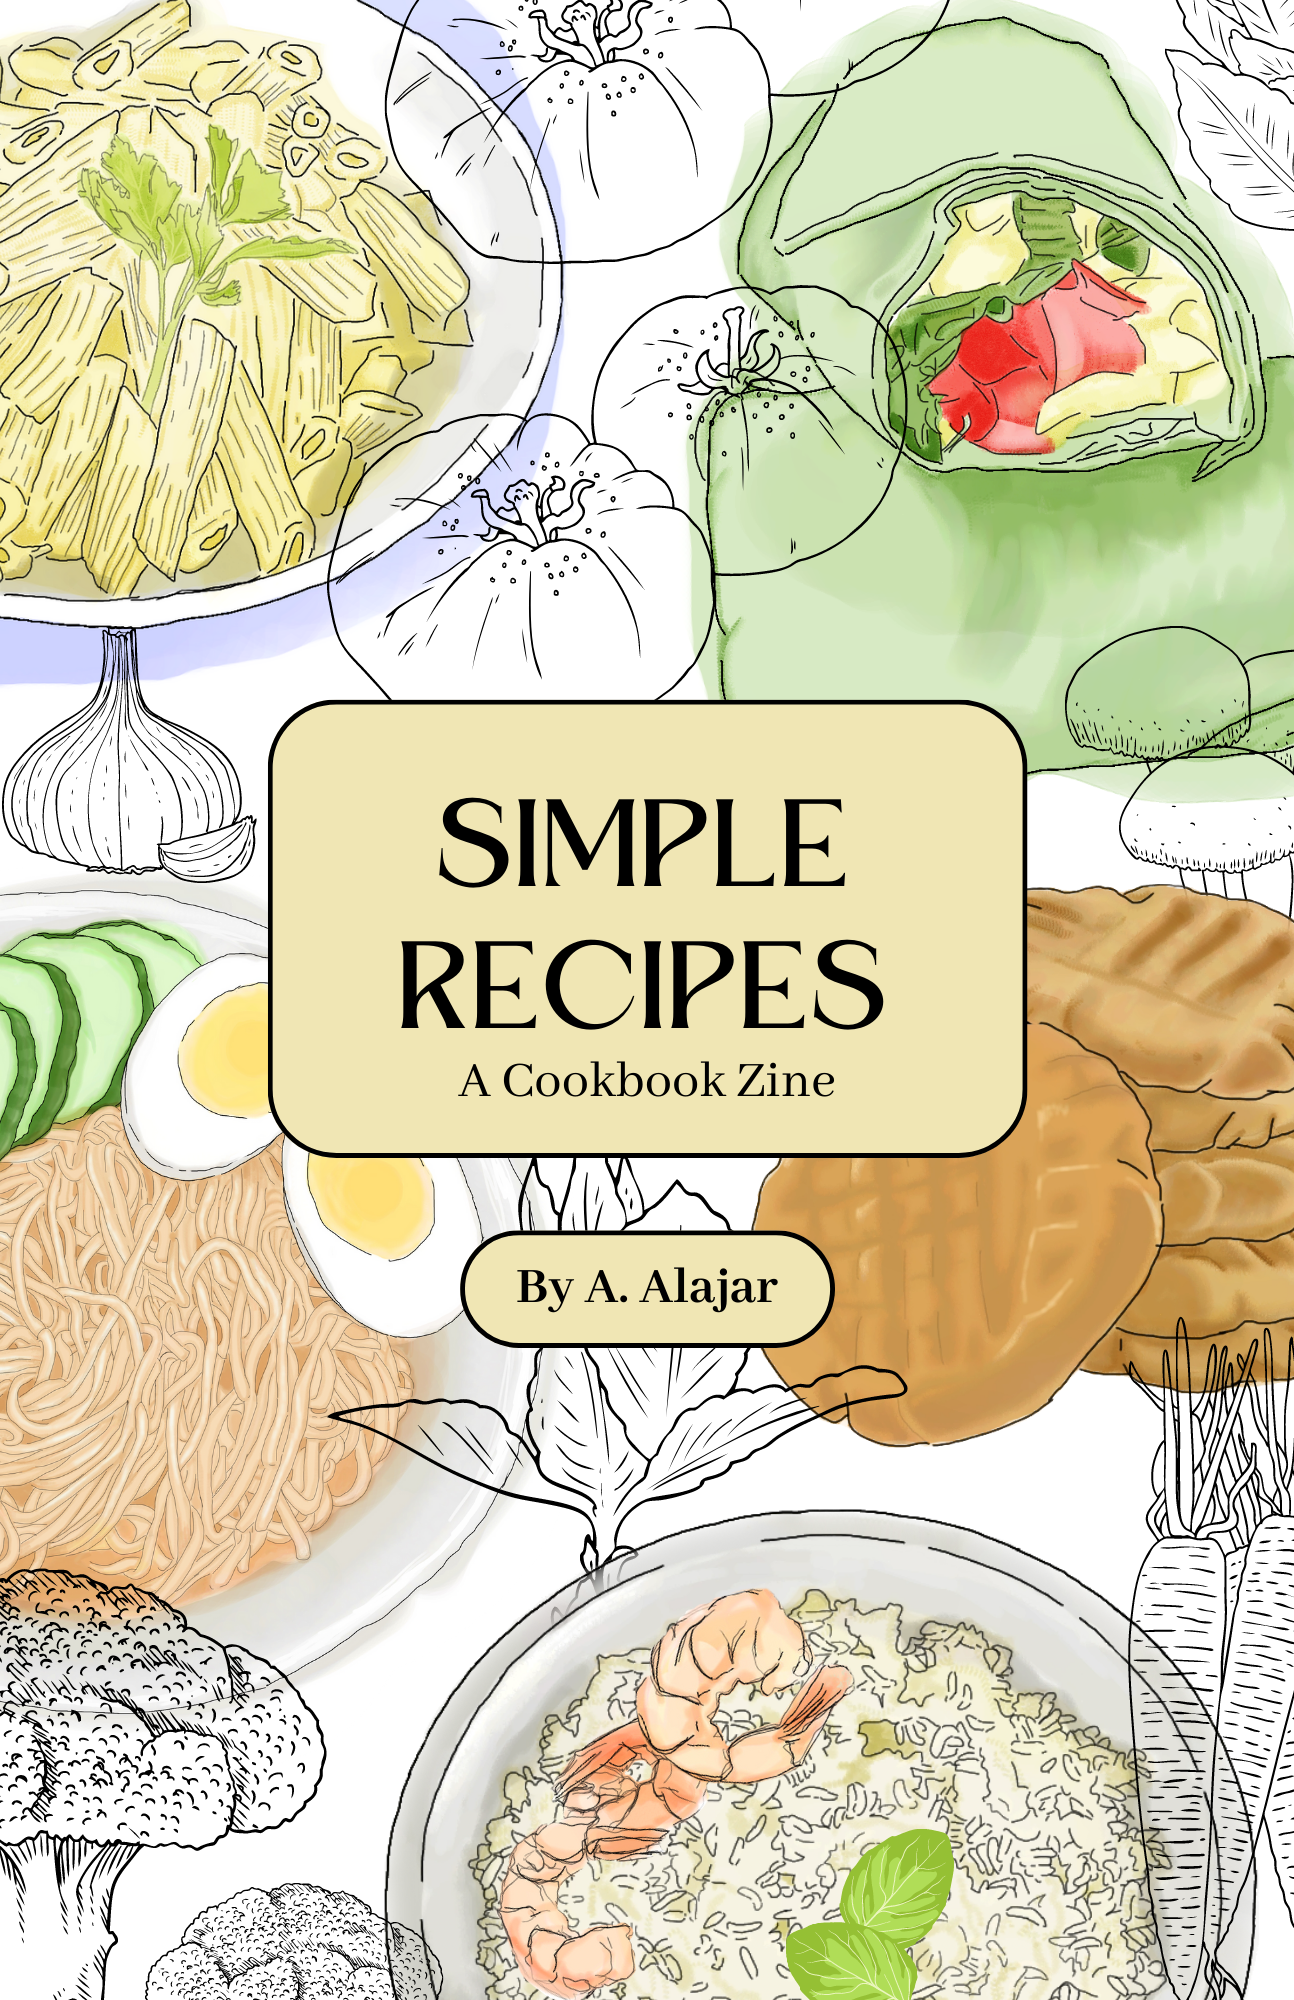 Book Clipart-open recipe book with cooking supplies clipart